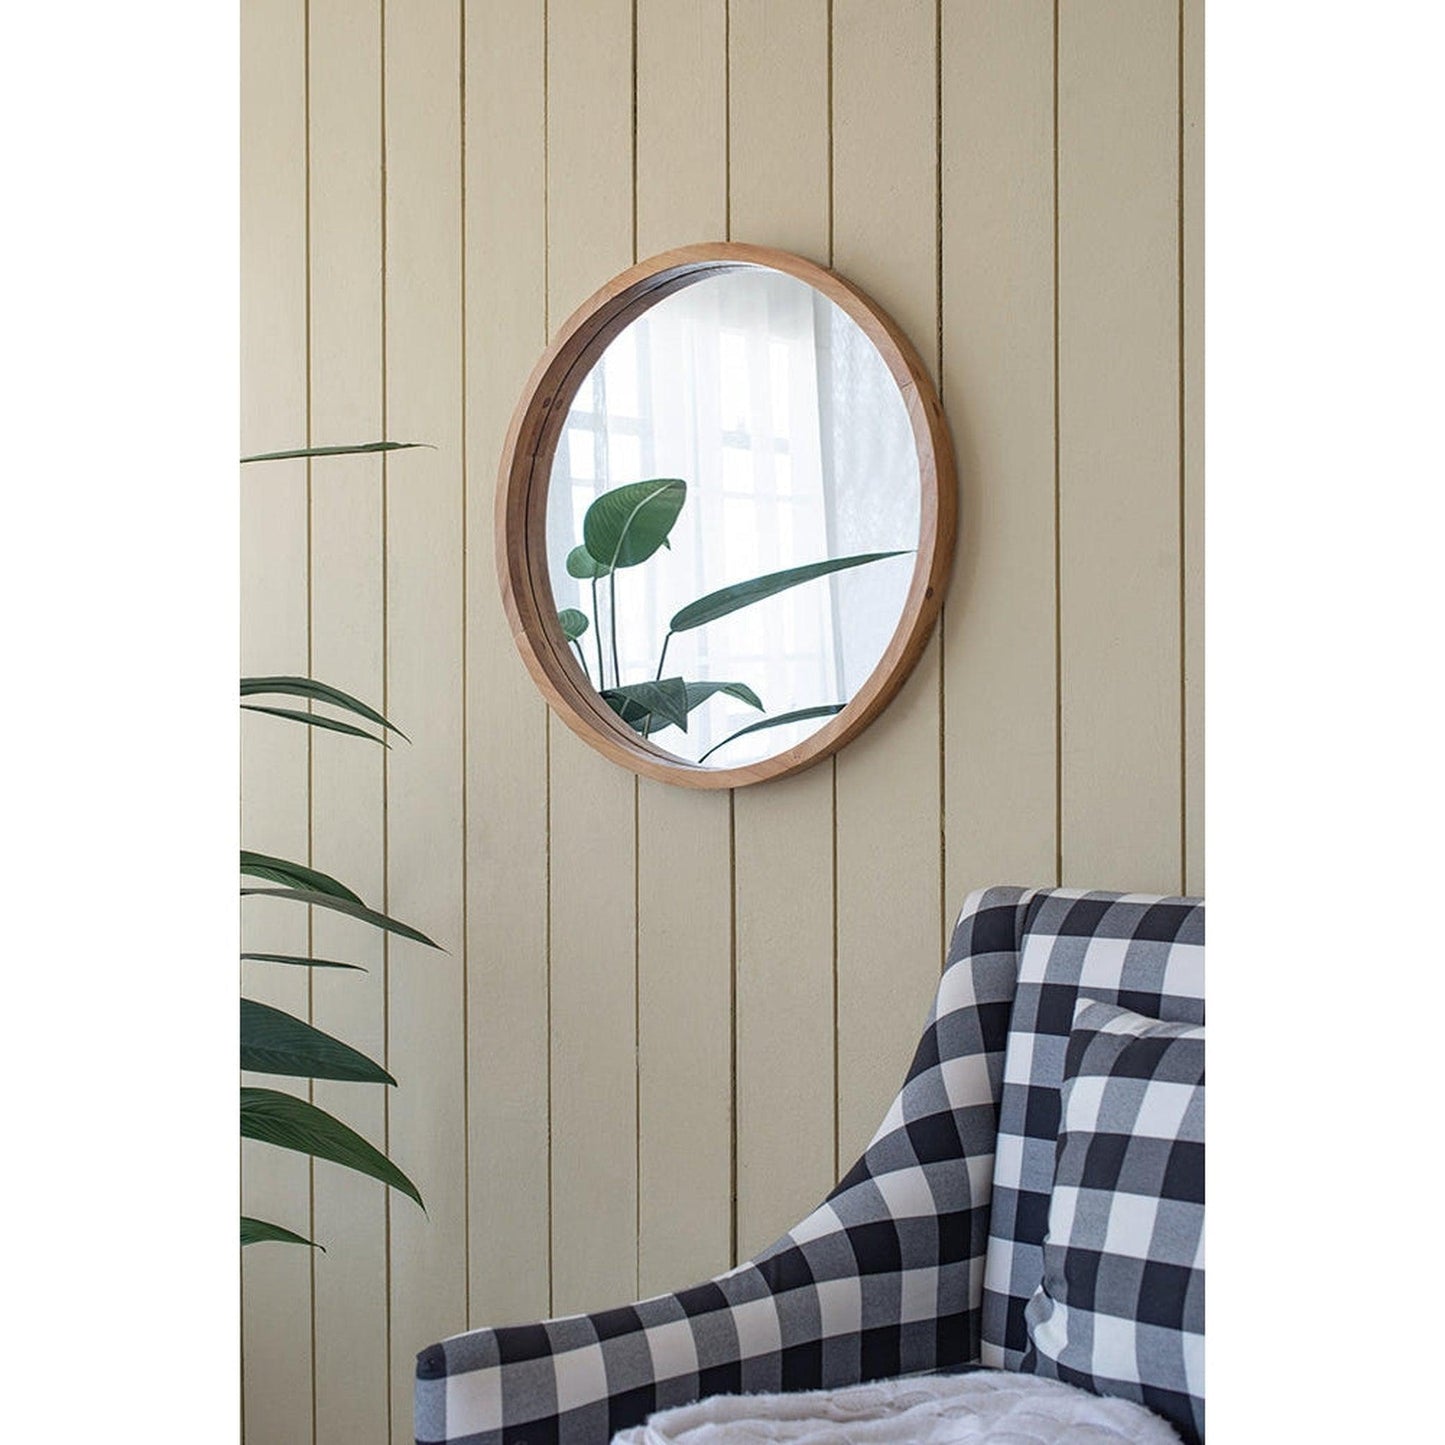 A&B Home Charleston 28" x 28" Bundle of 14 Round Warm Brown Wooden Frame Wall-Mounted Mirror